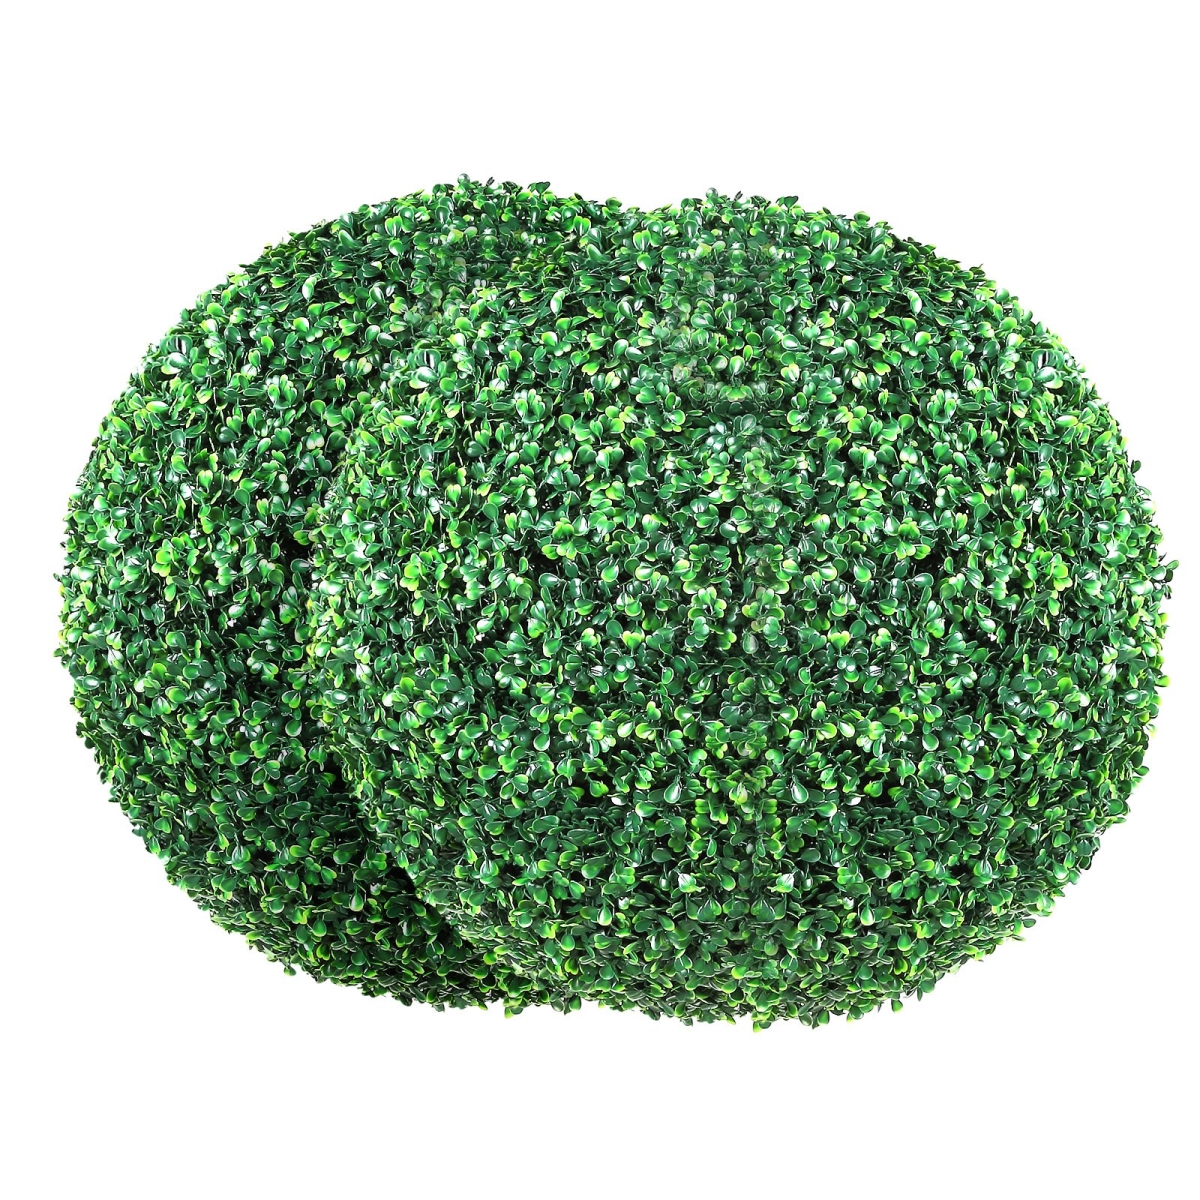 Picture of Vevor RGZWXJQ16YC0L5L4VV0 16 in. Tall Artificial Topiaries Boxwood Trees - 2 Piece